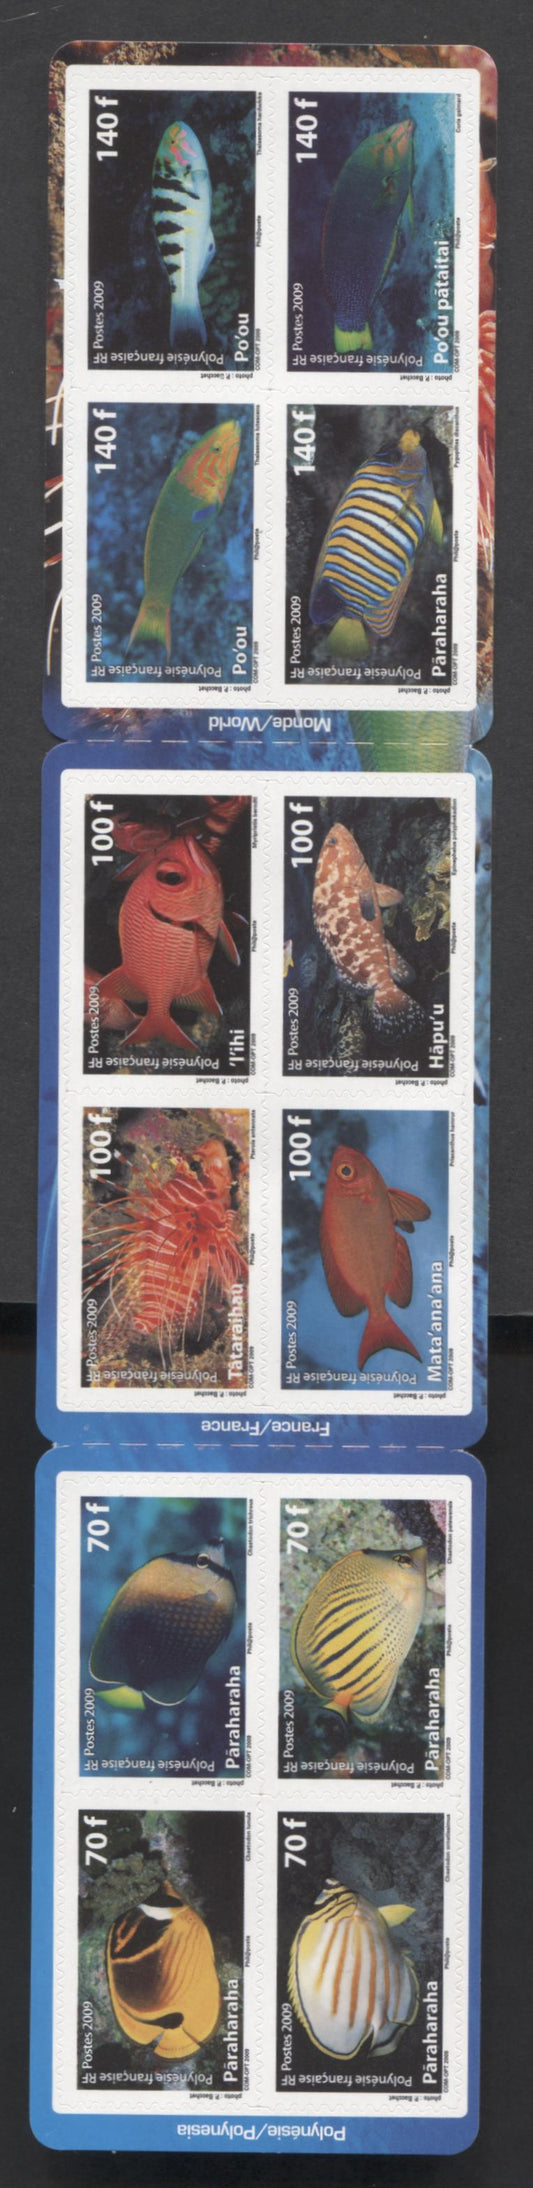 Lot 227 French Polynesia SC#1011  2009 Fish Definitives, A VFNH Self-Adhesive Booklet Of 12, Click on Listing to See ALL Pictures, 2017 Scott Cat. $31